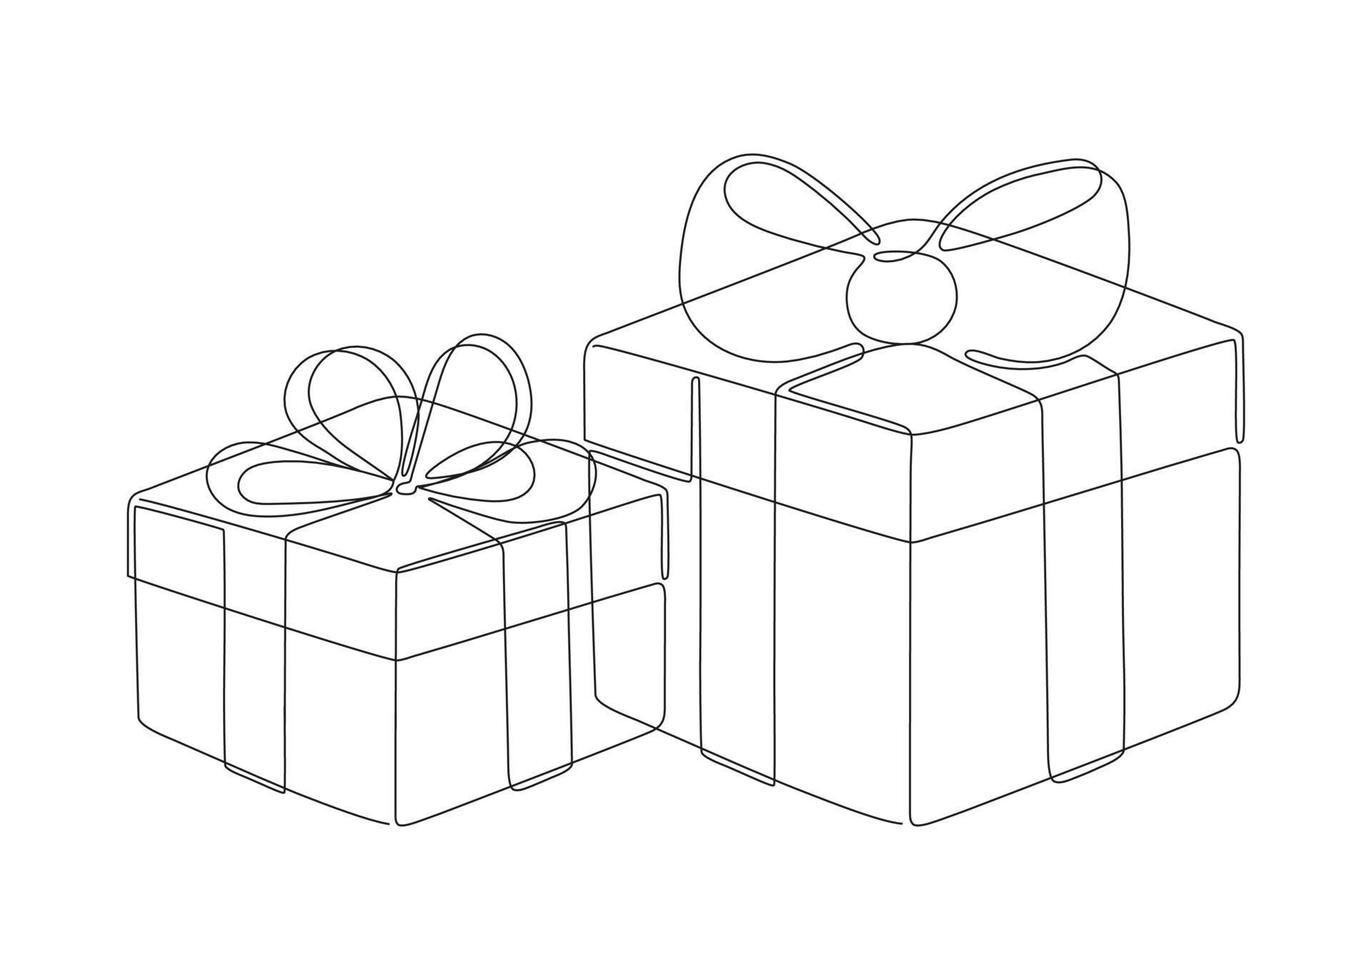 https://static.vecteezy.com/system/resources/previews/011/419/165/non_2x/gift-box-outline-present-for-christmas-birthday-or-holiday-continuous-one-art-line-drawing-wrapped-package-with-ribbon-bow-surprise-on-party-and-celebration-outline-illustration-vector.jpg